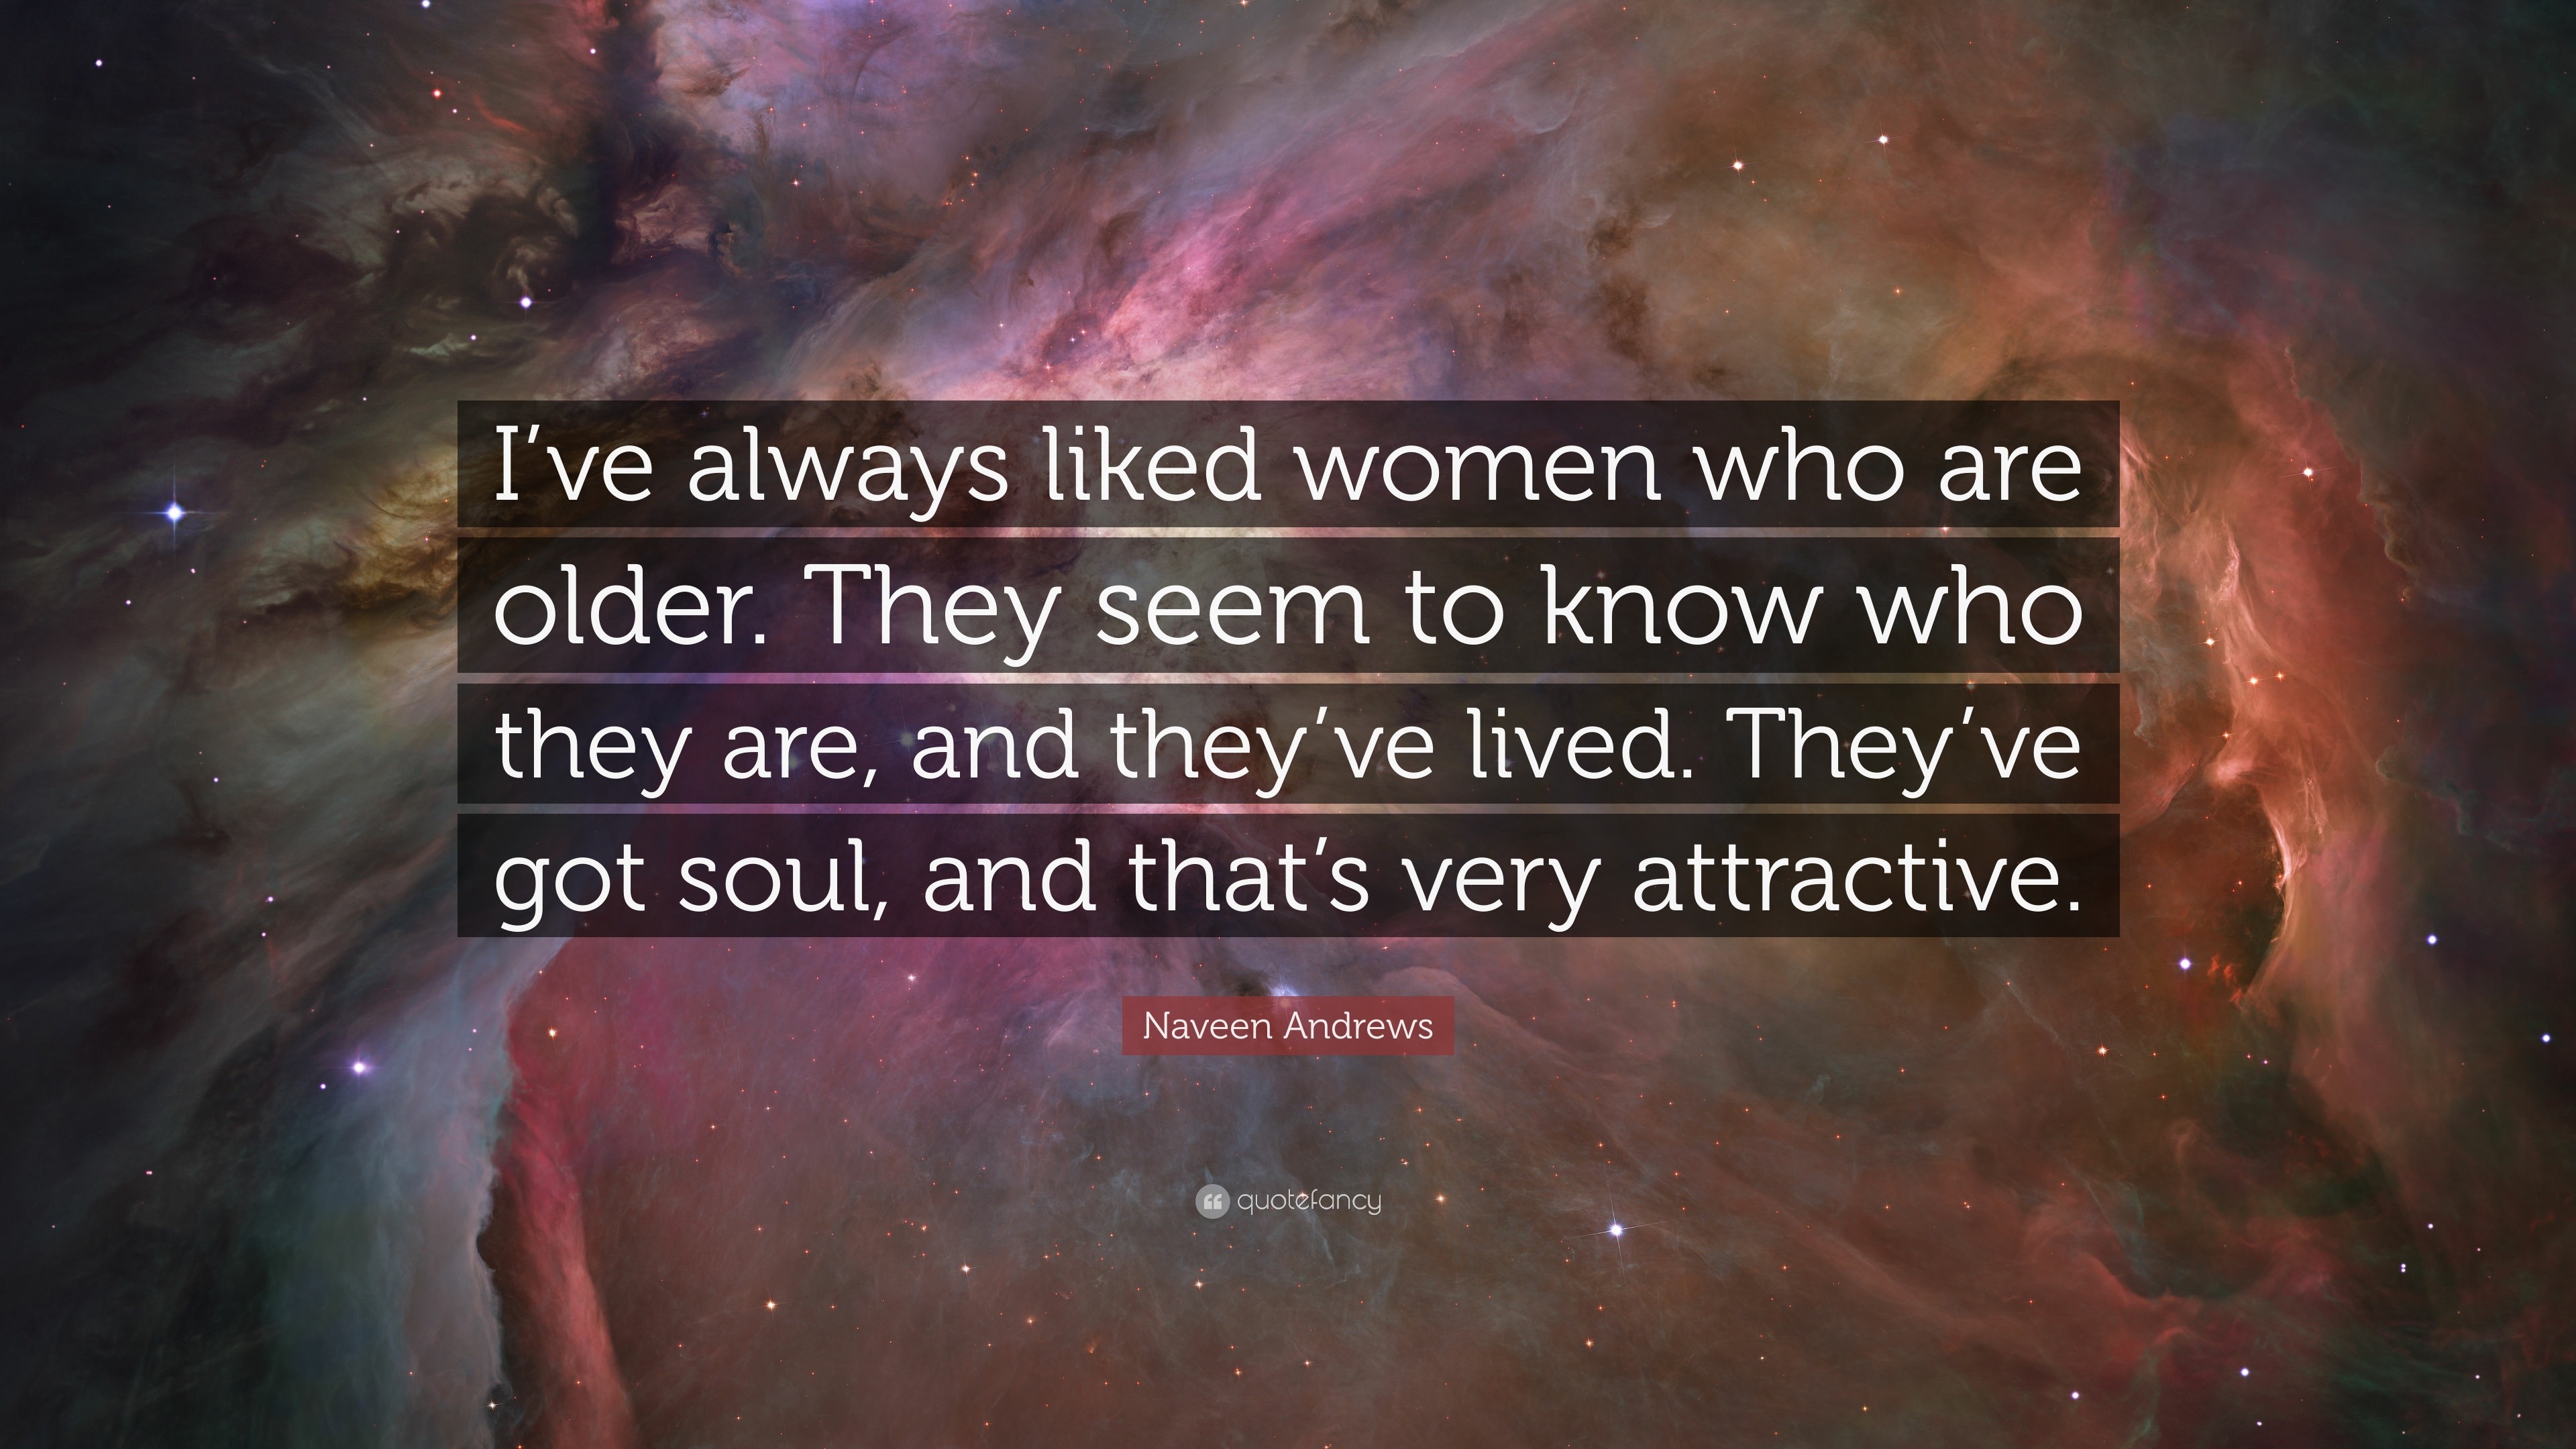 https://quotefancy.com/media/wallpaper/3840x2160/1432937-Naveen-Andrews-Quote-I-ve-always-liked-women-who-are-older-They.jpg